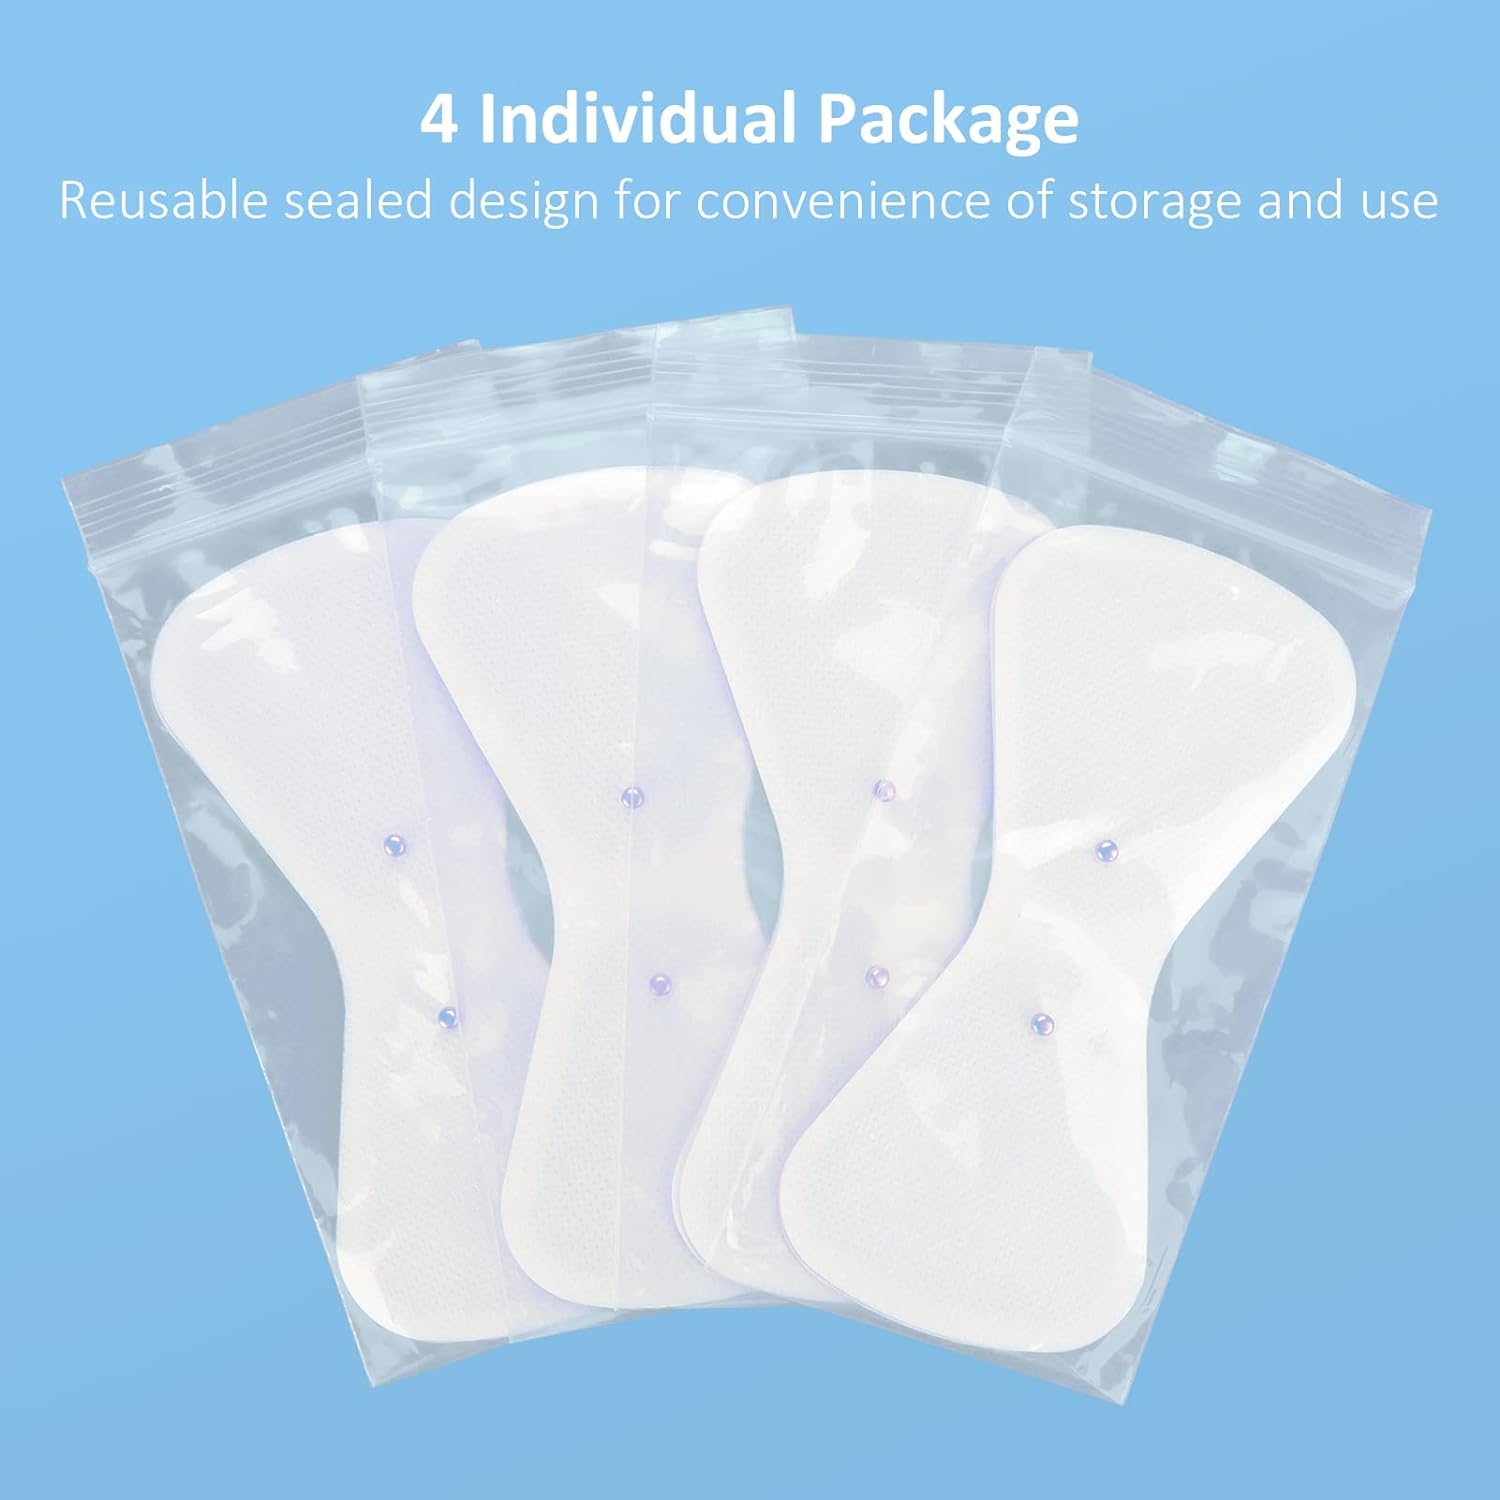 Comfytemp Official TENS Unit Replacement Pads, 4 Pack Wireless TENS Pads, 5.1" x 2.4" Reusable Self Adhesive Electrodes with Premium Quality